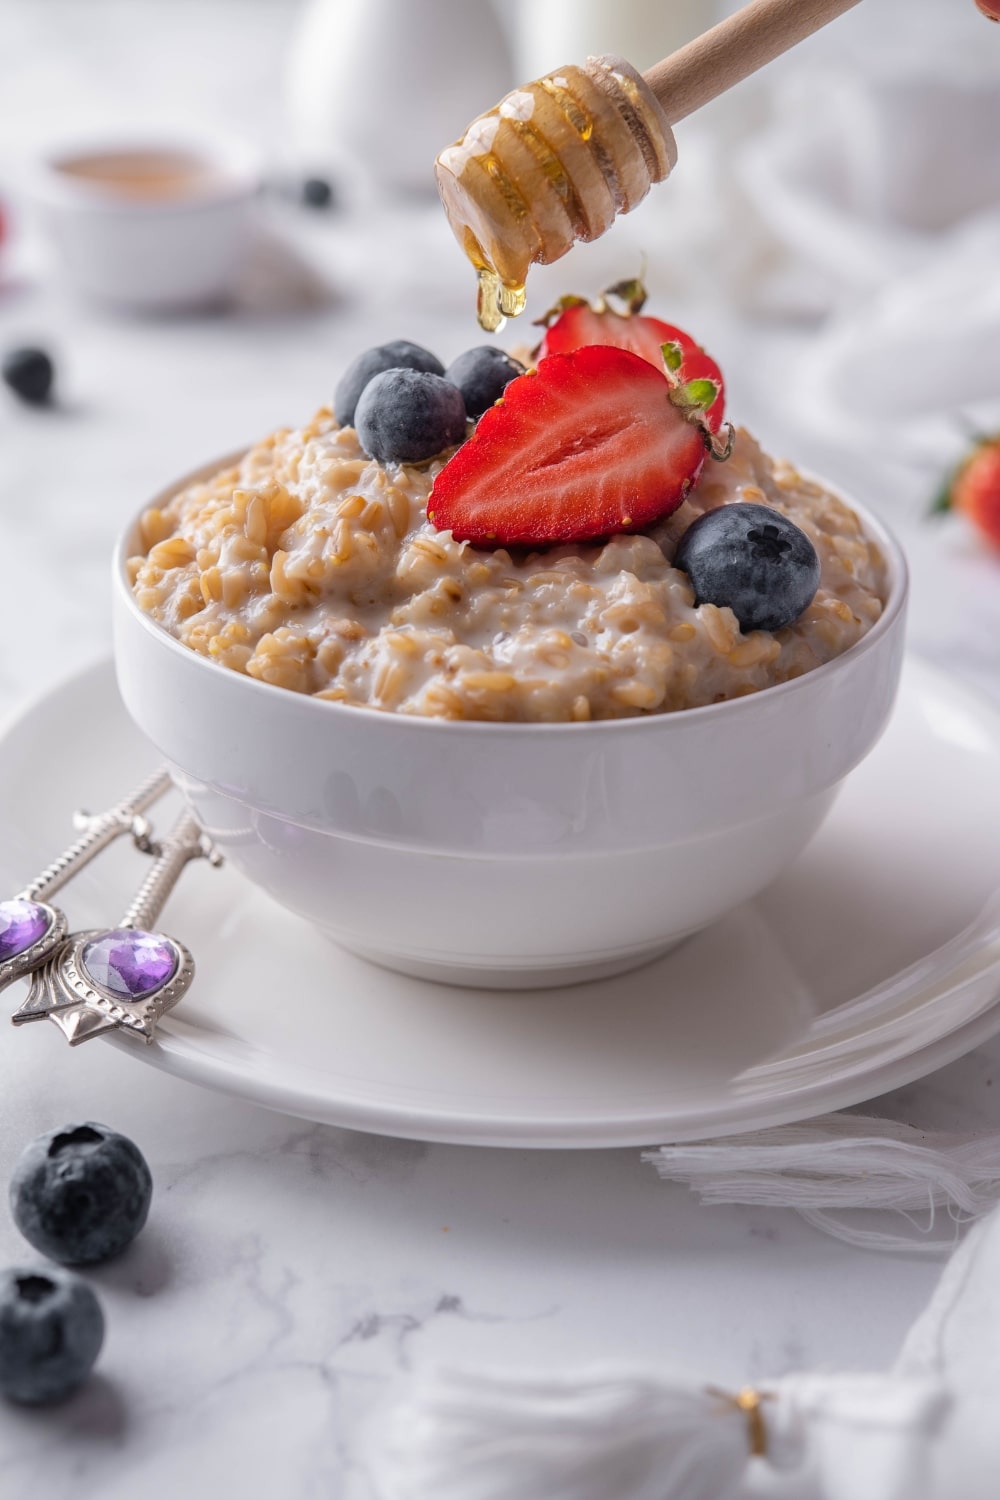 A honey dipper dripping honey onto a bowl of creamy steel cut oats garnished with sliced strawberries and blueberries.